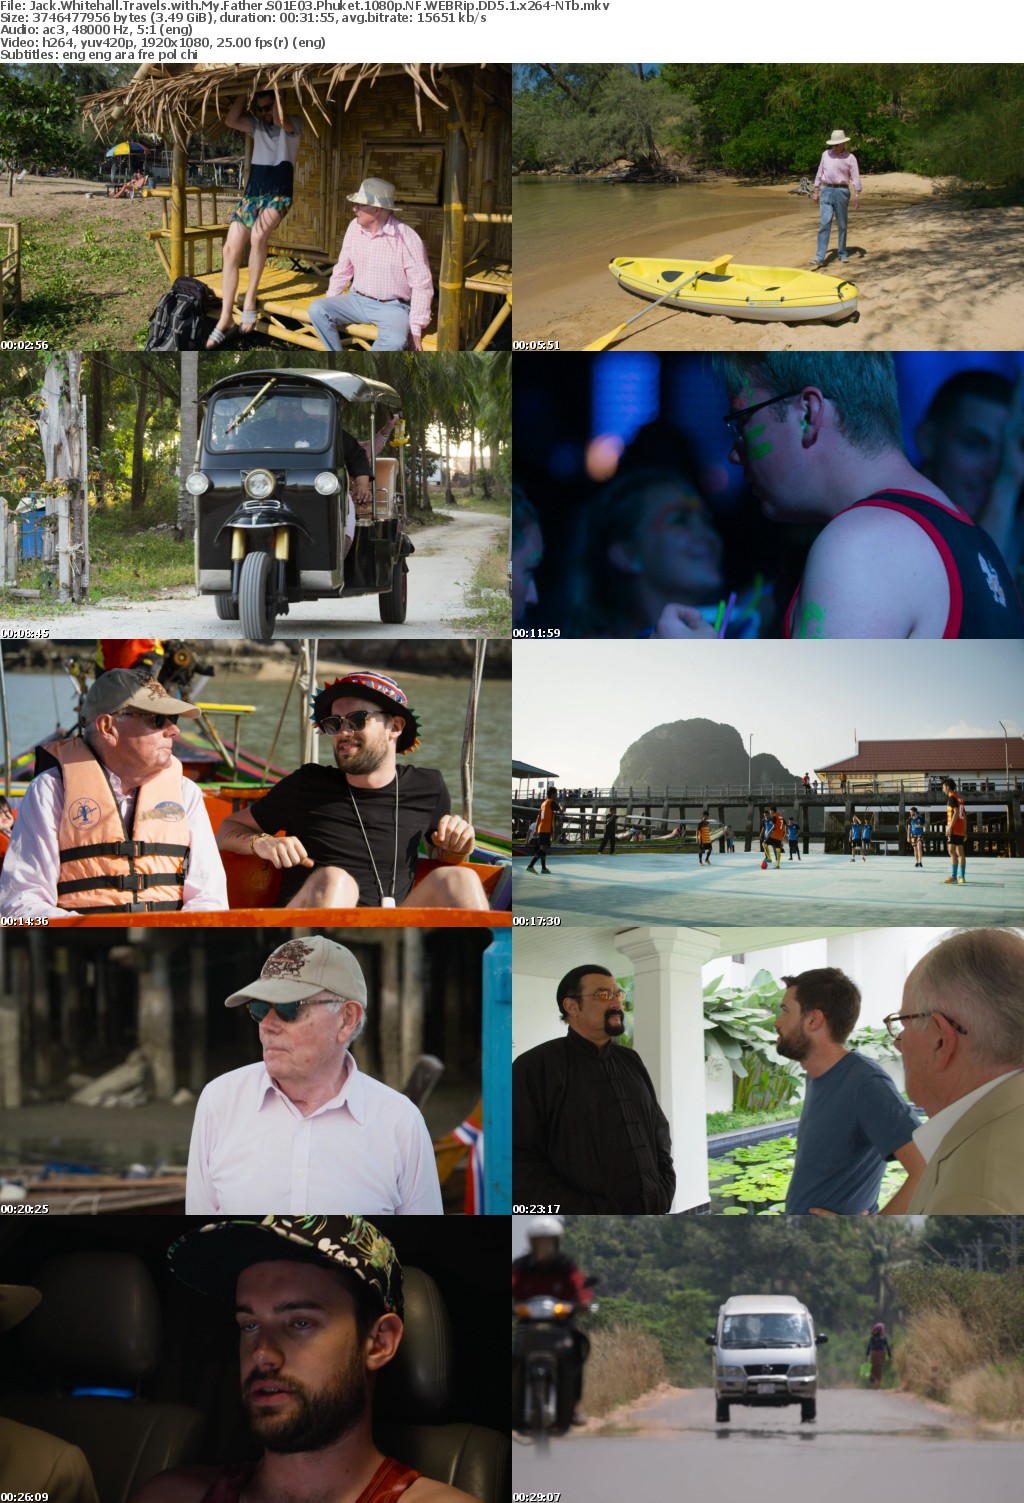 Jack Whitehall Travels with My Father S01E03 Phuket 1080p NF WEBRip DD5 1 x264-NTb